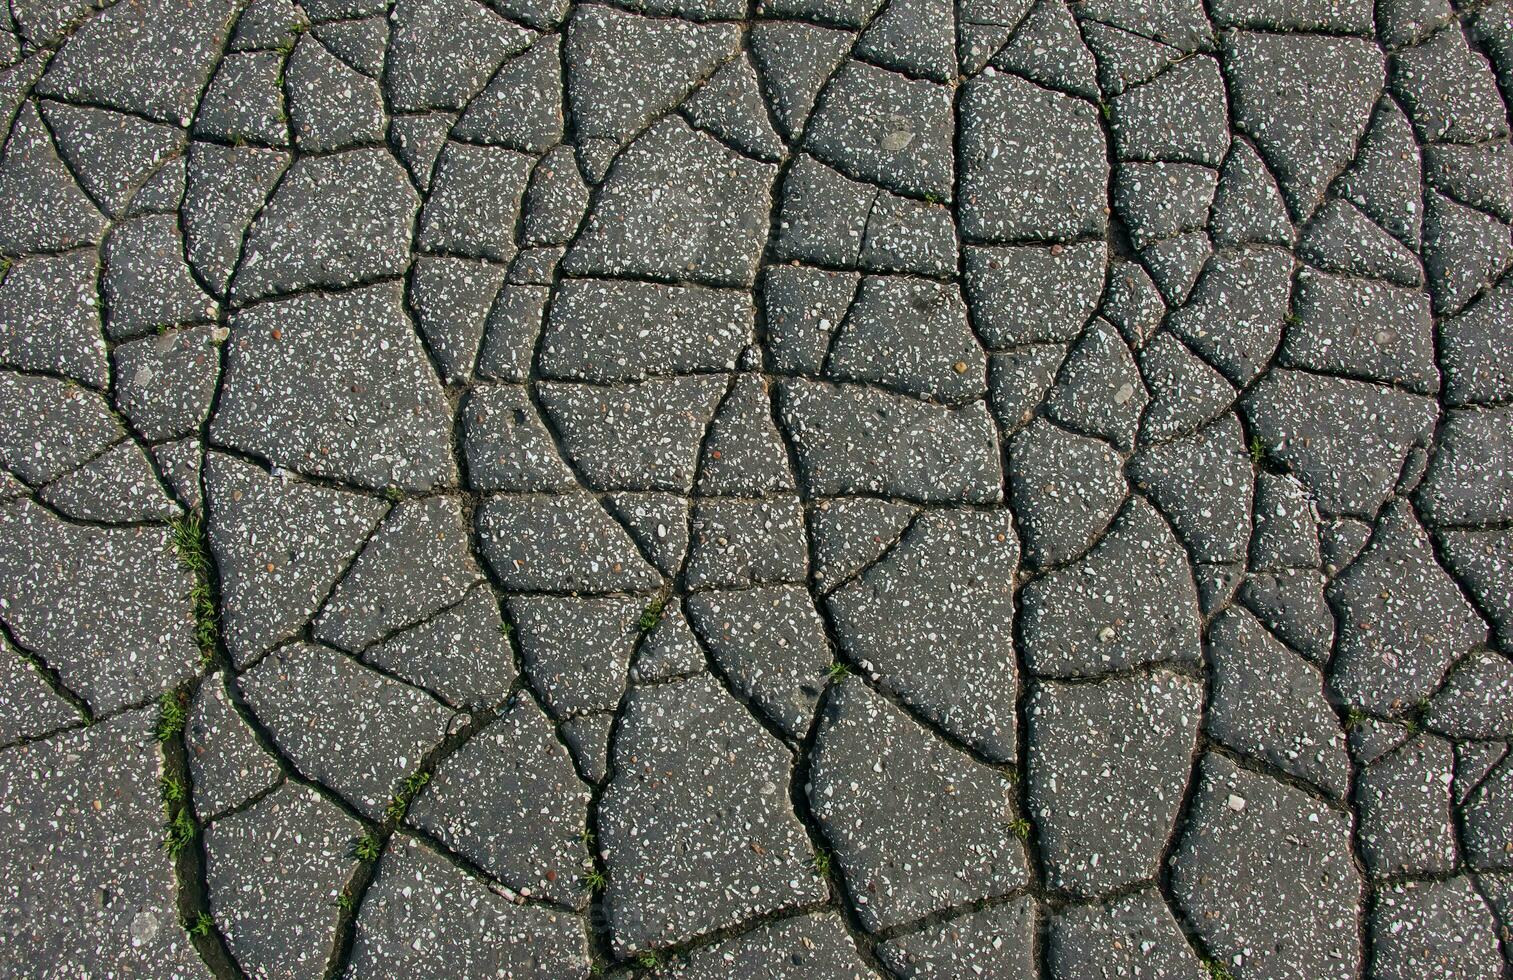 A network of black cracks on the asphalt surface. Road texture with weathered surface, showcasing the effects of time and wear. photo